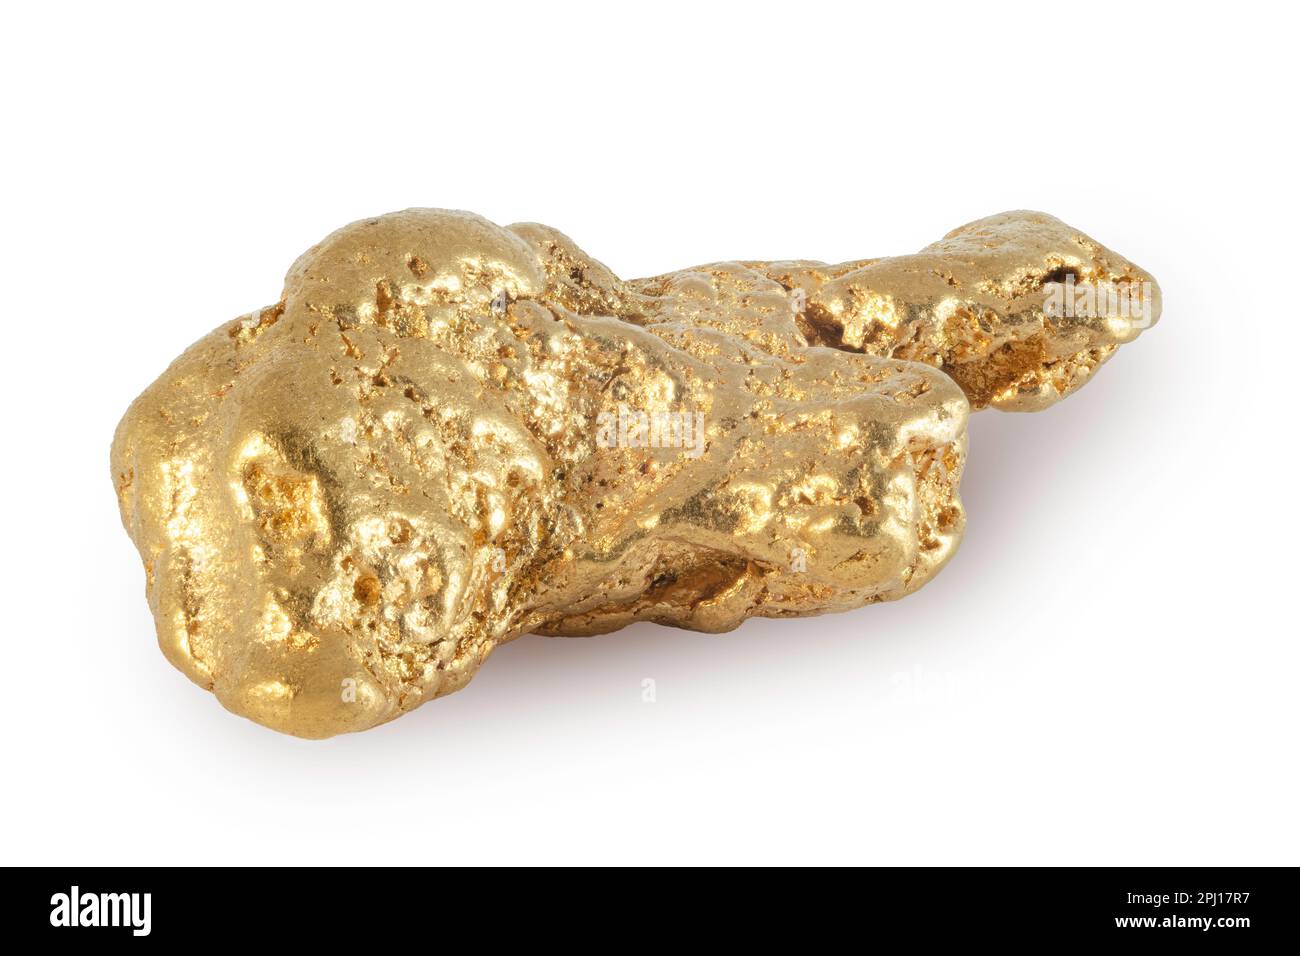 Gold nugget from Carisbrook Australia, on solid white background. Stock Photo